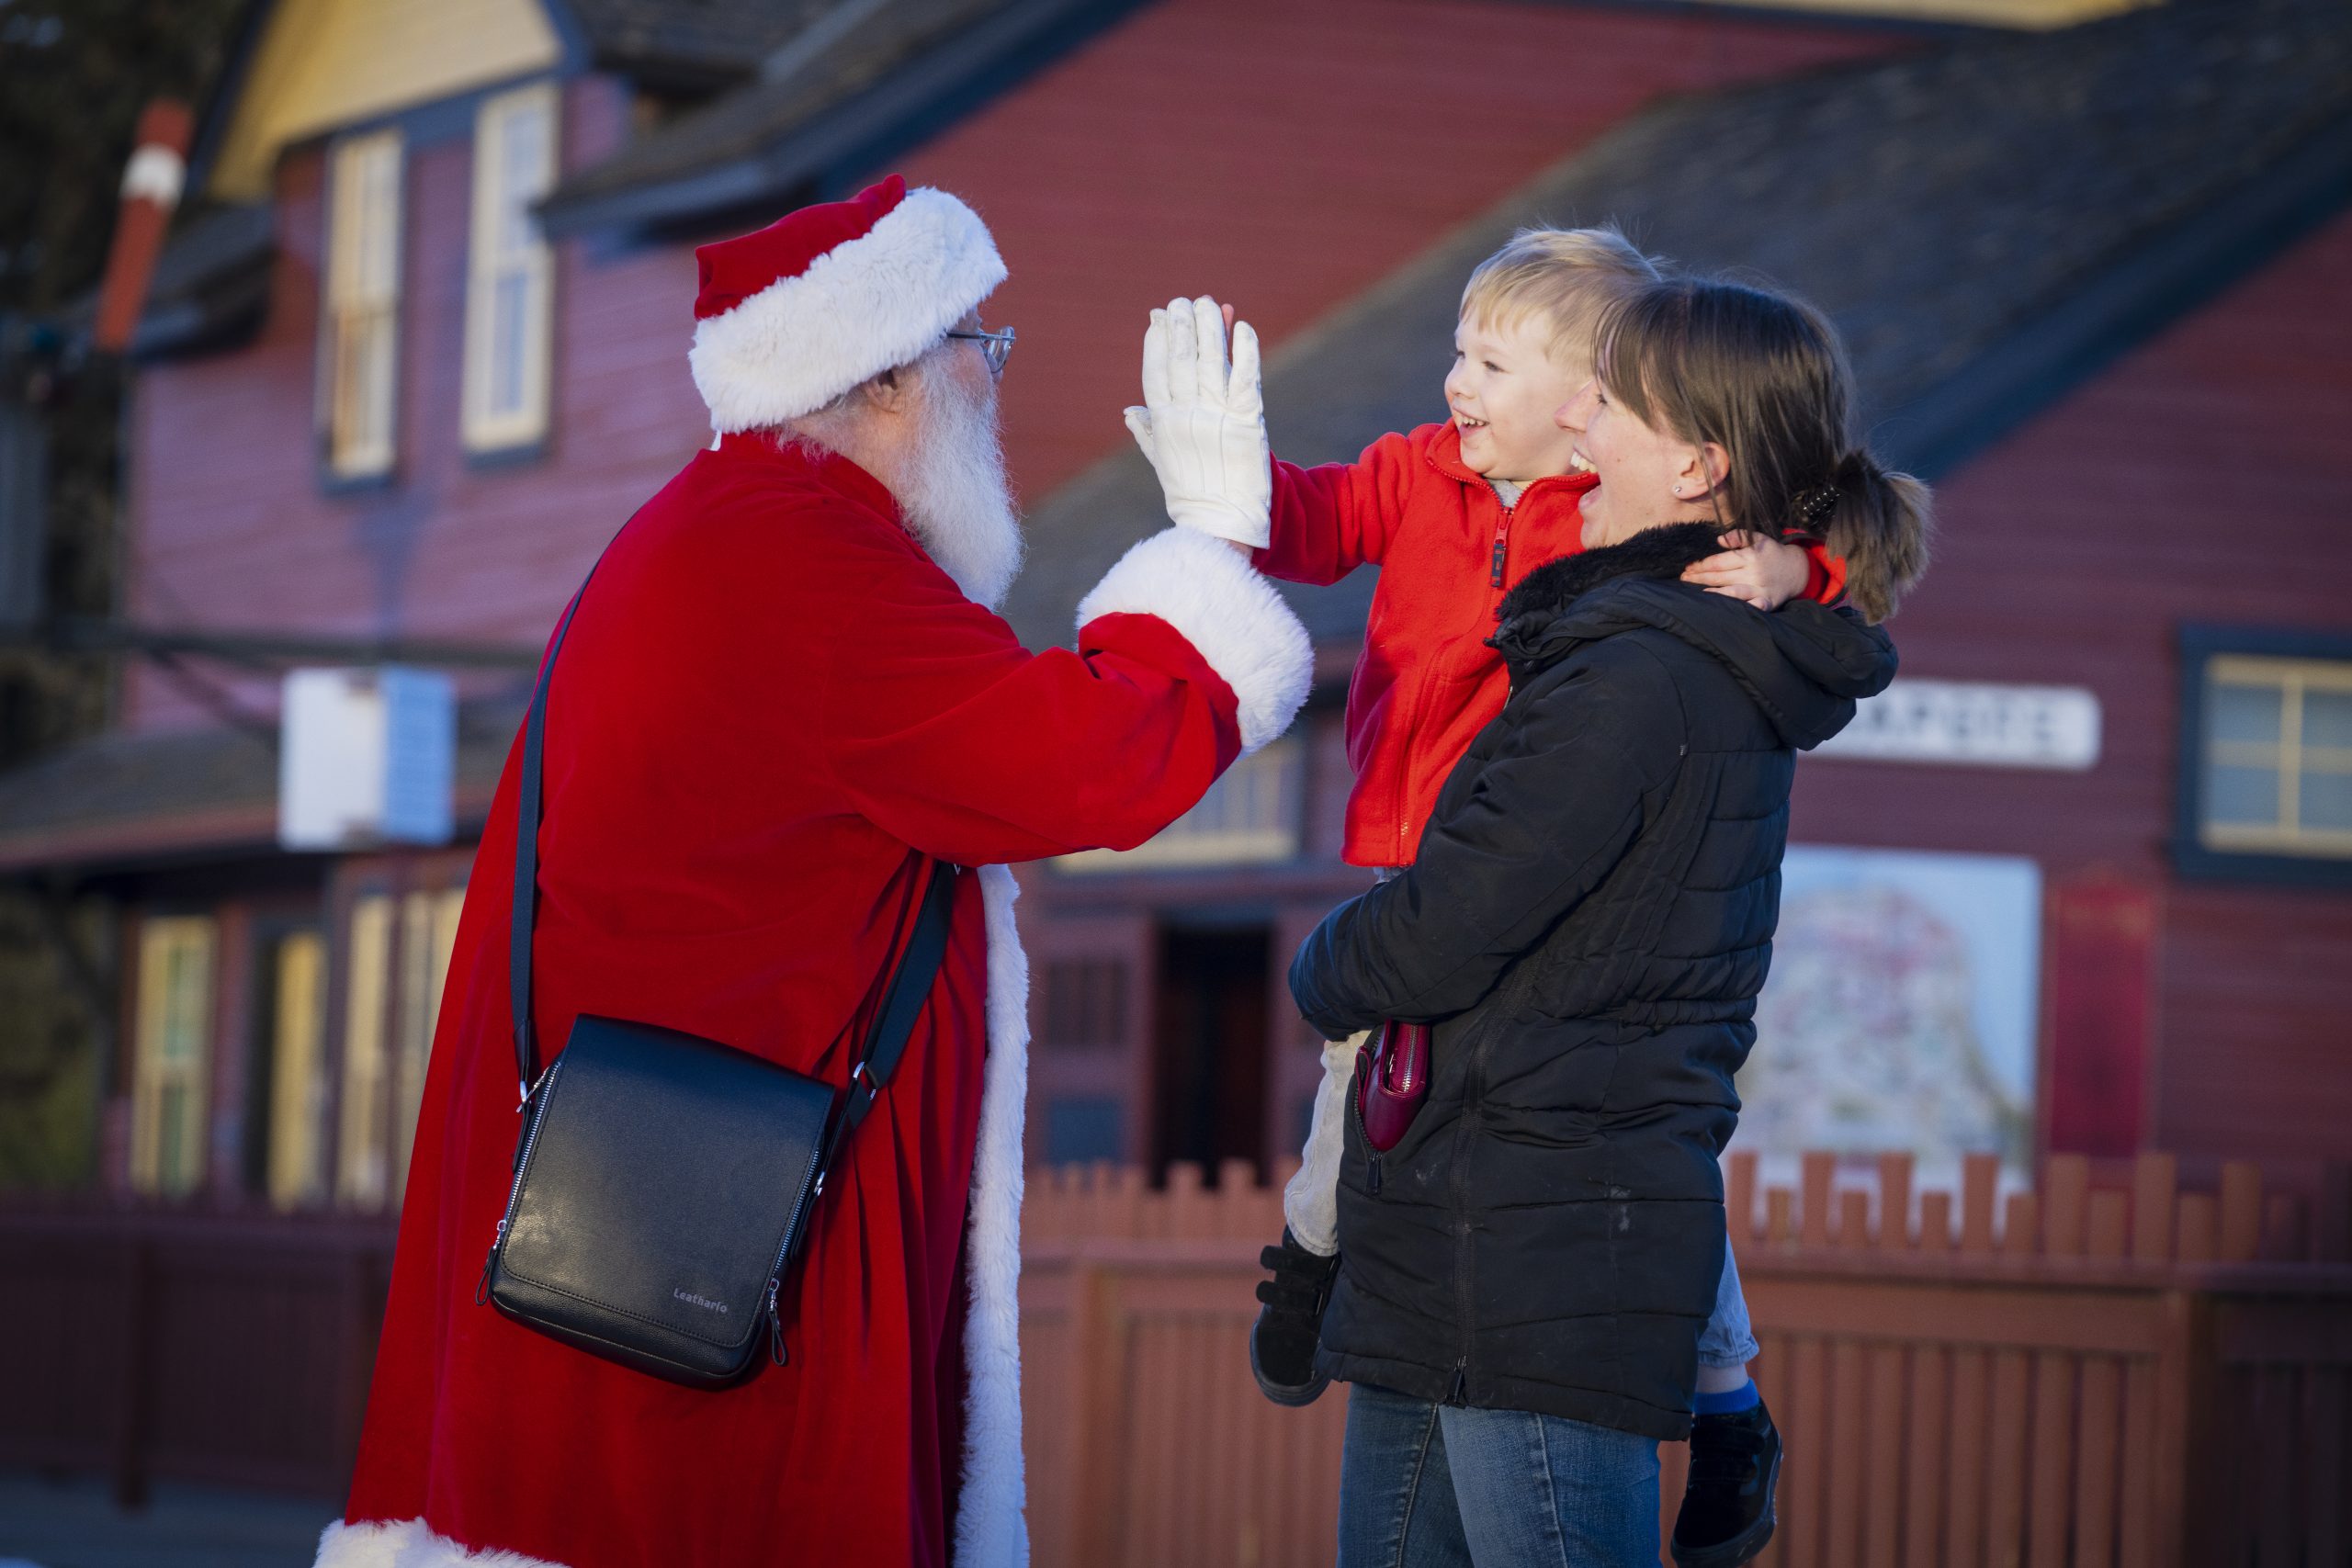 Santa high-fiving a young child